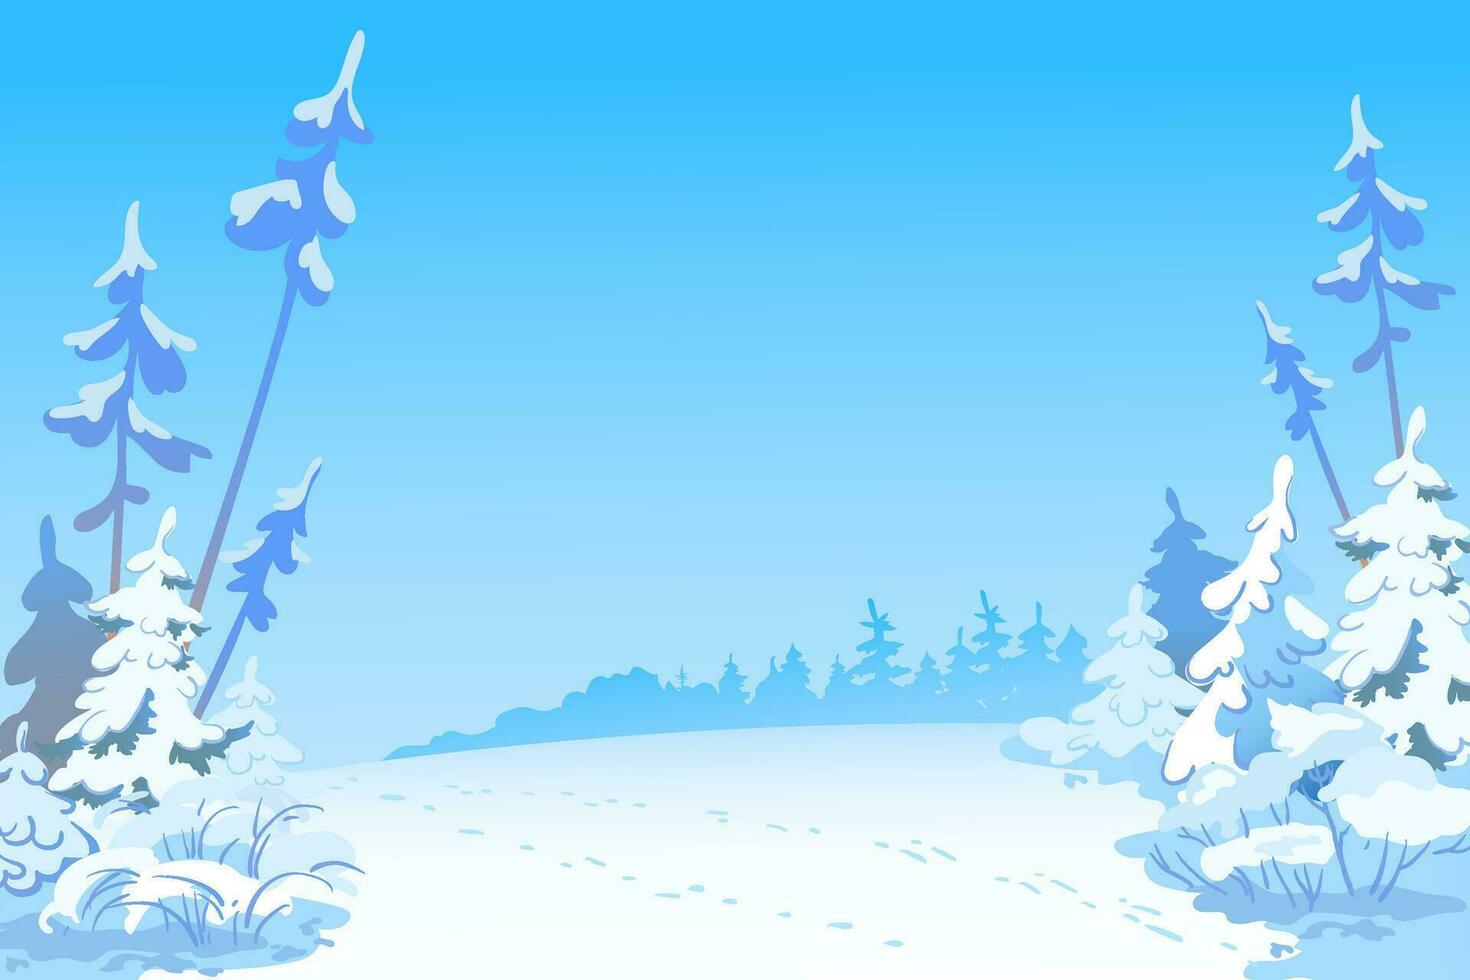 Winter scene with snow. Snow-covered trees on the background of the forest. Snowdrifts sparkling in the cold and frozen fir trees. Christmas scene. Vector illustration.